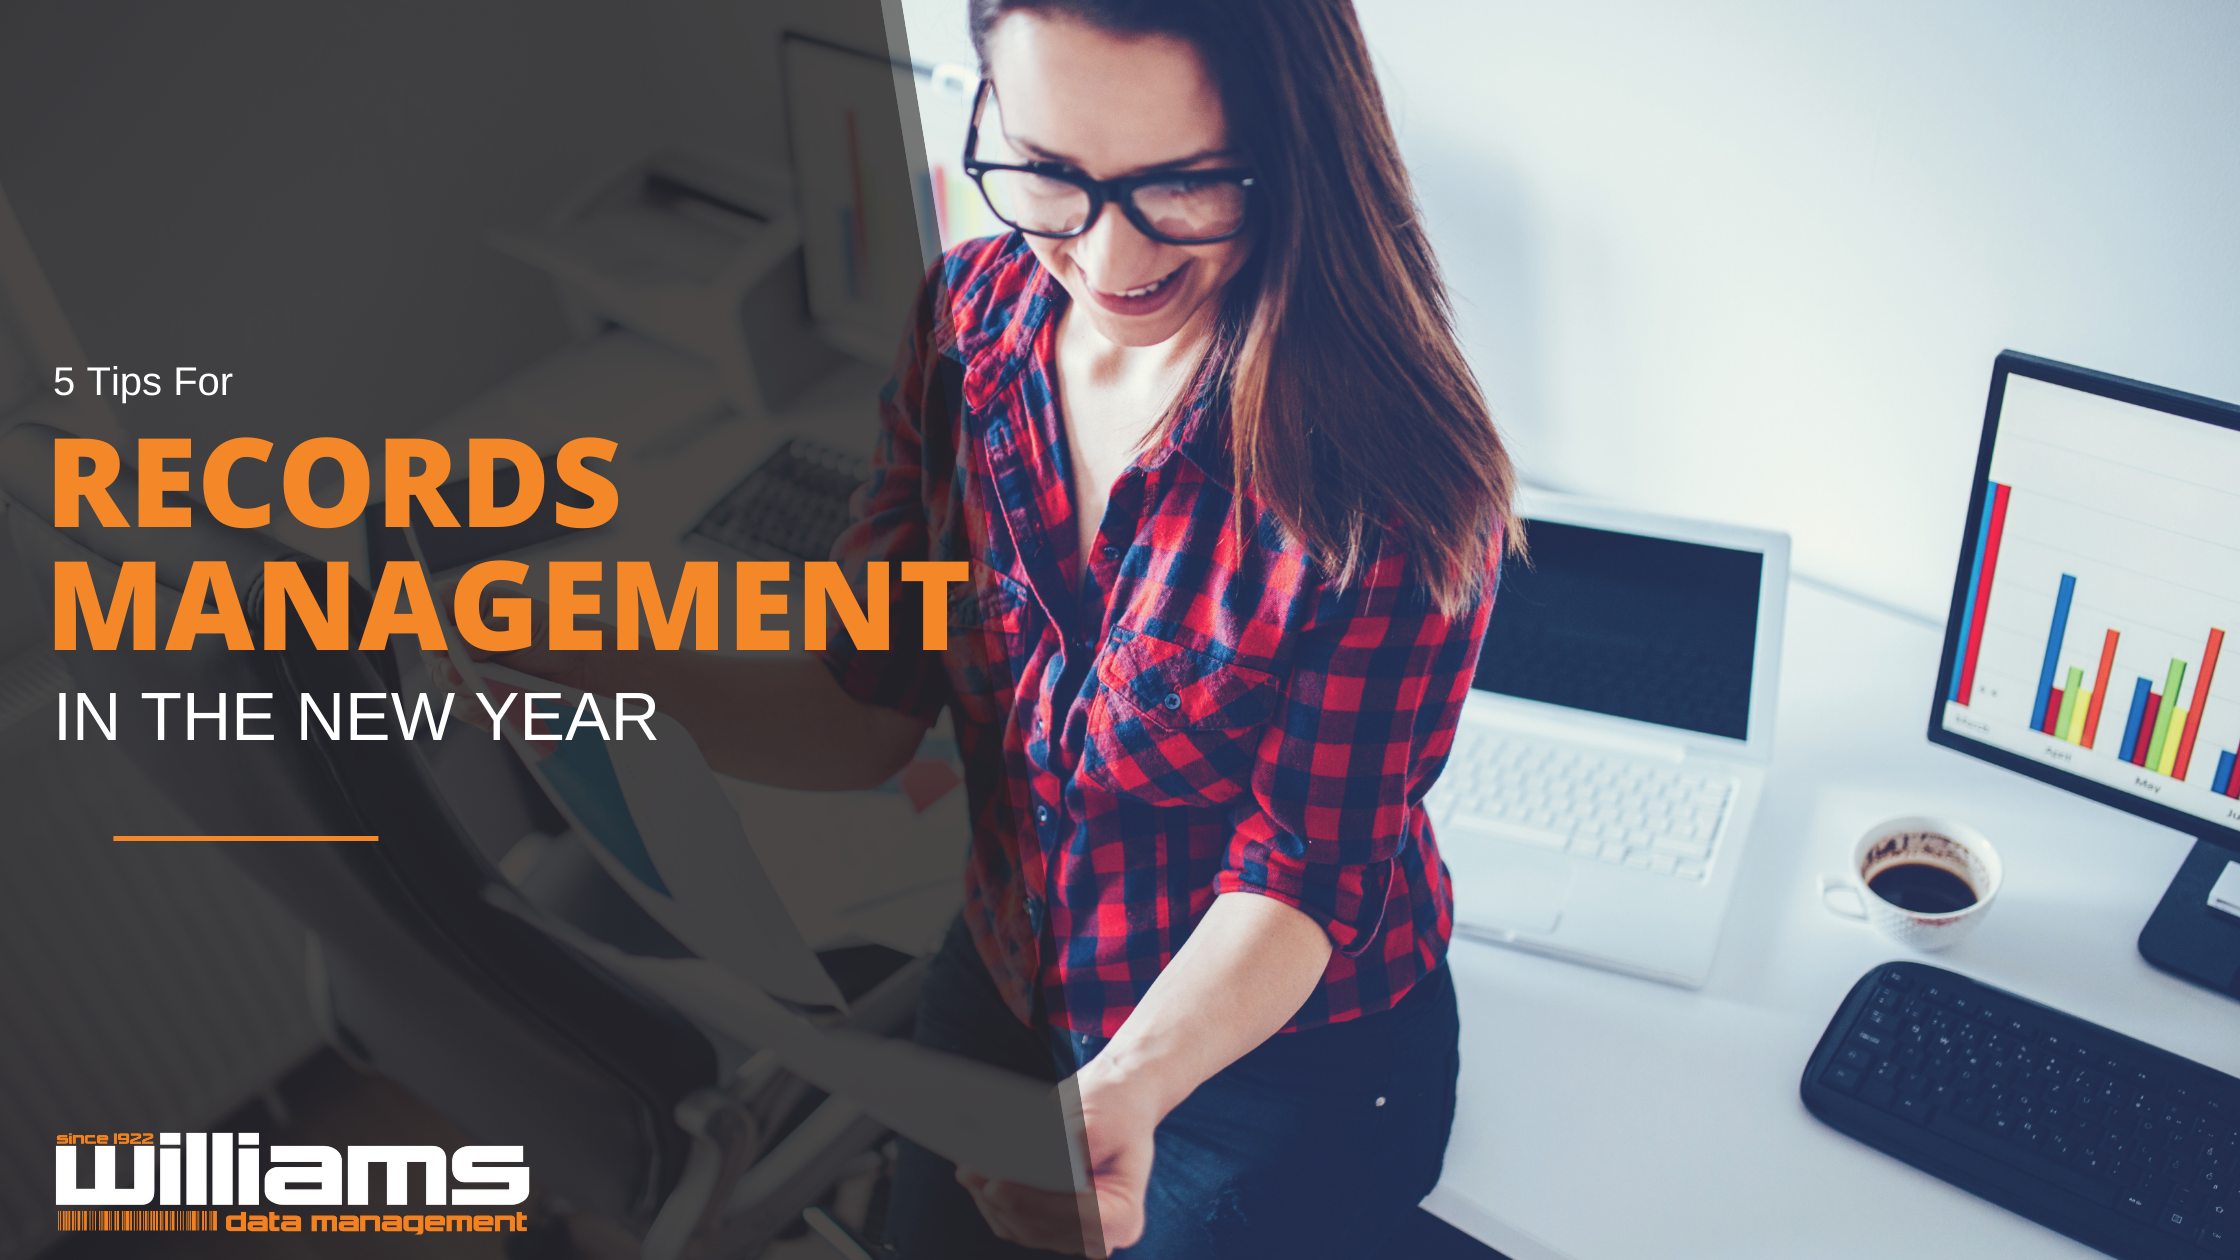 5 Tips for Records Management in the New Year